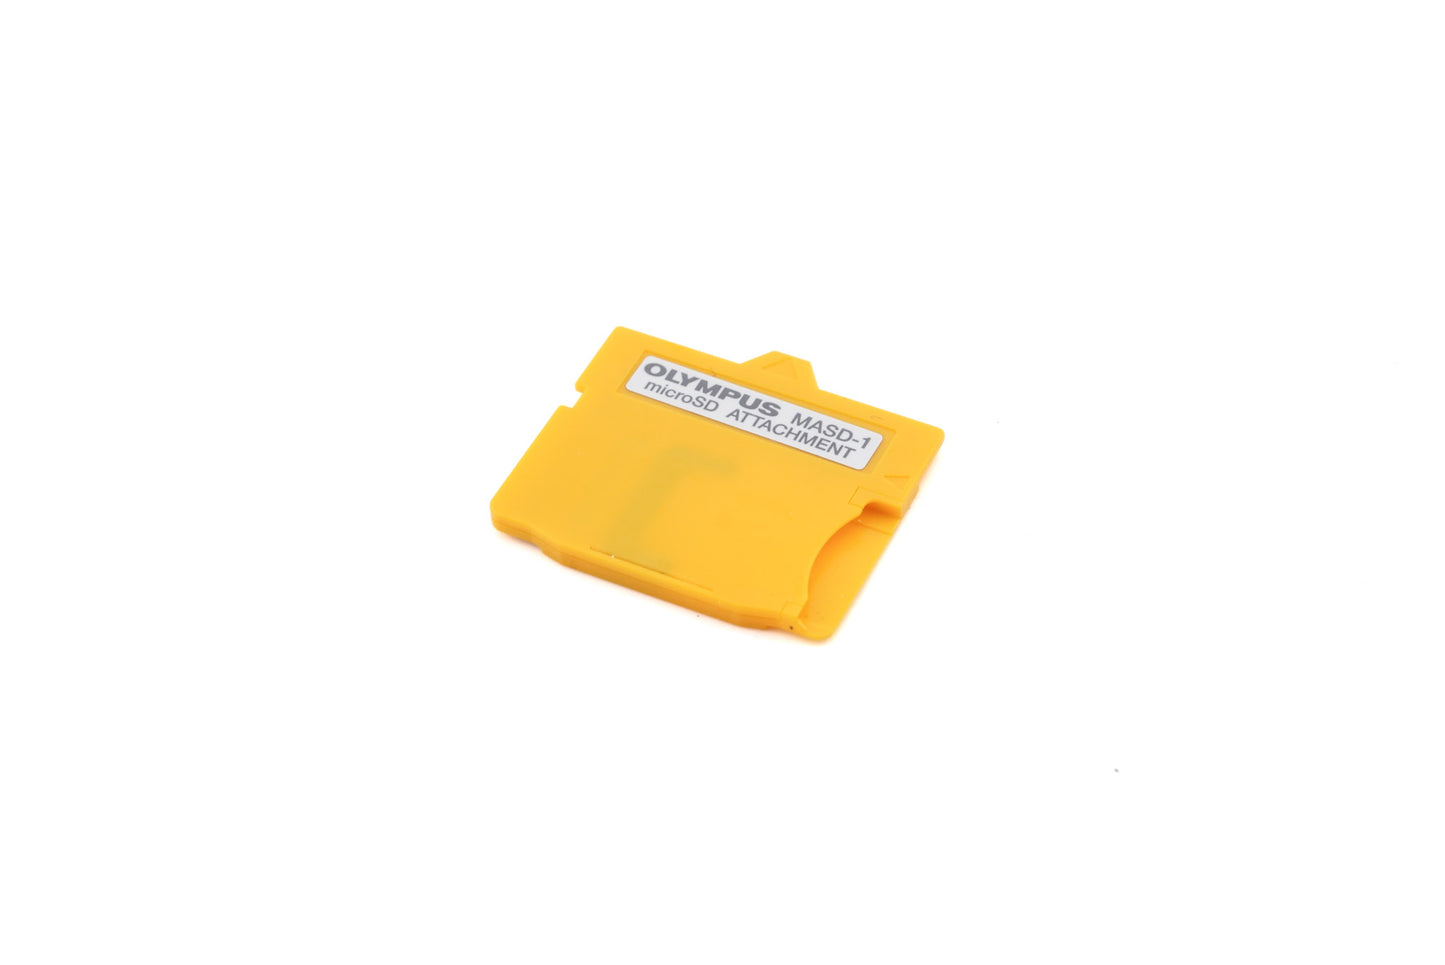 Olympus MASD-1 MicroSD - xD Picture Card Adapter - Accessory